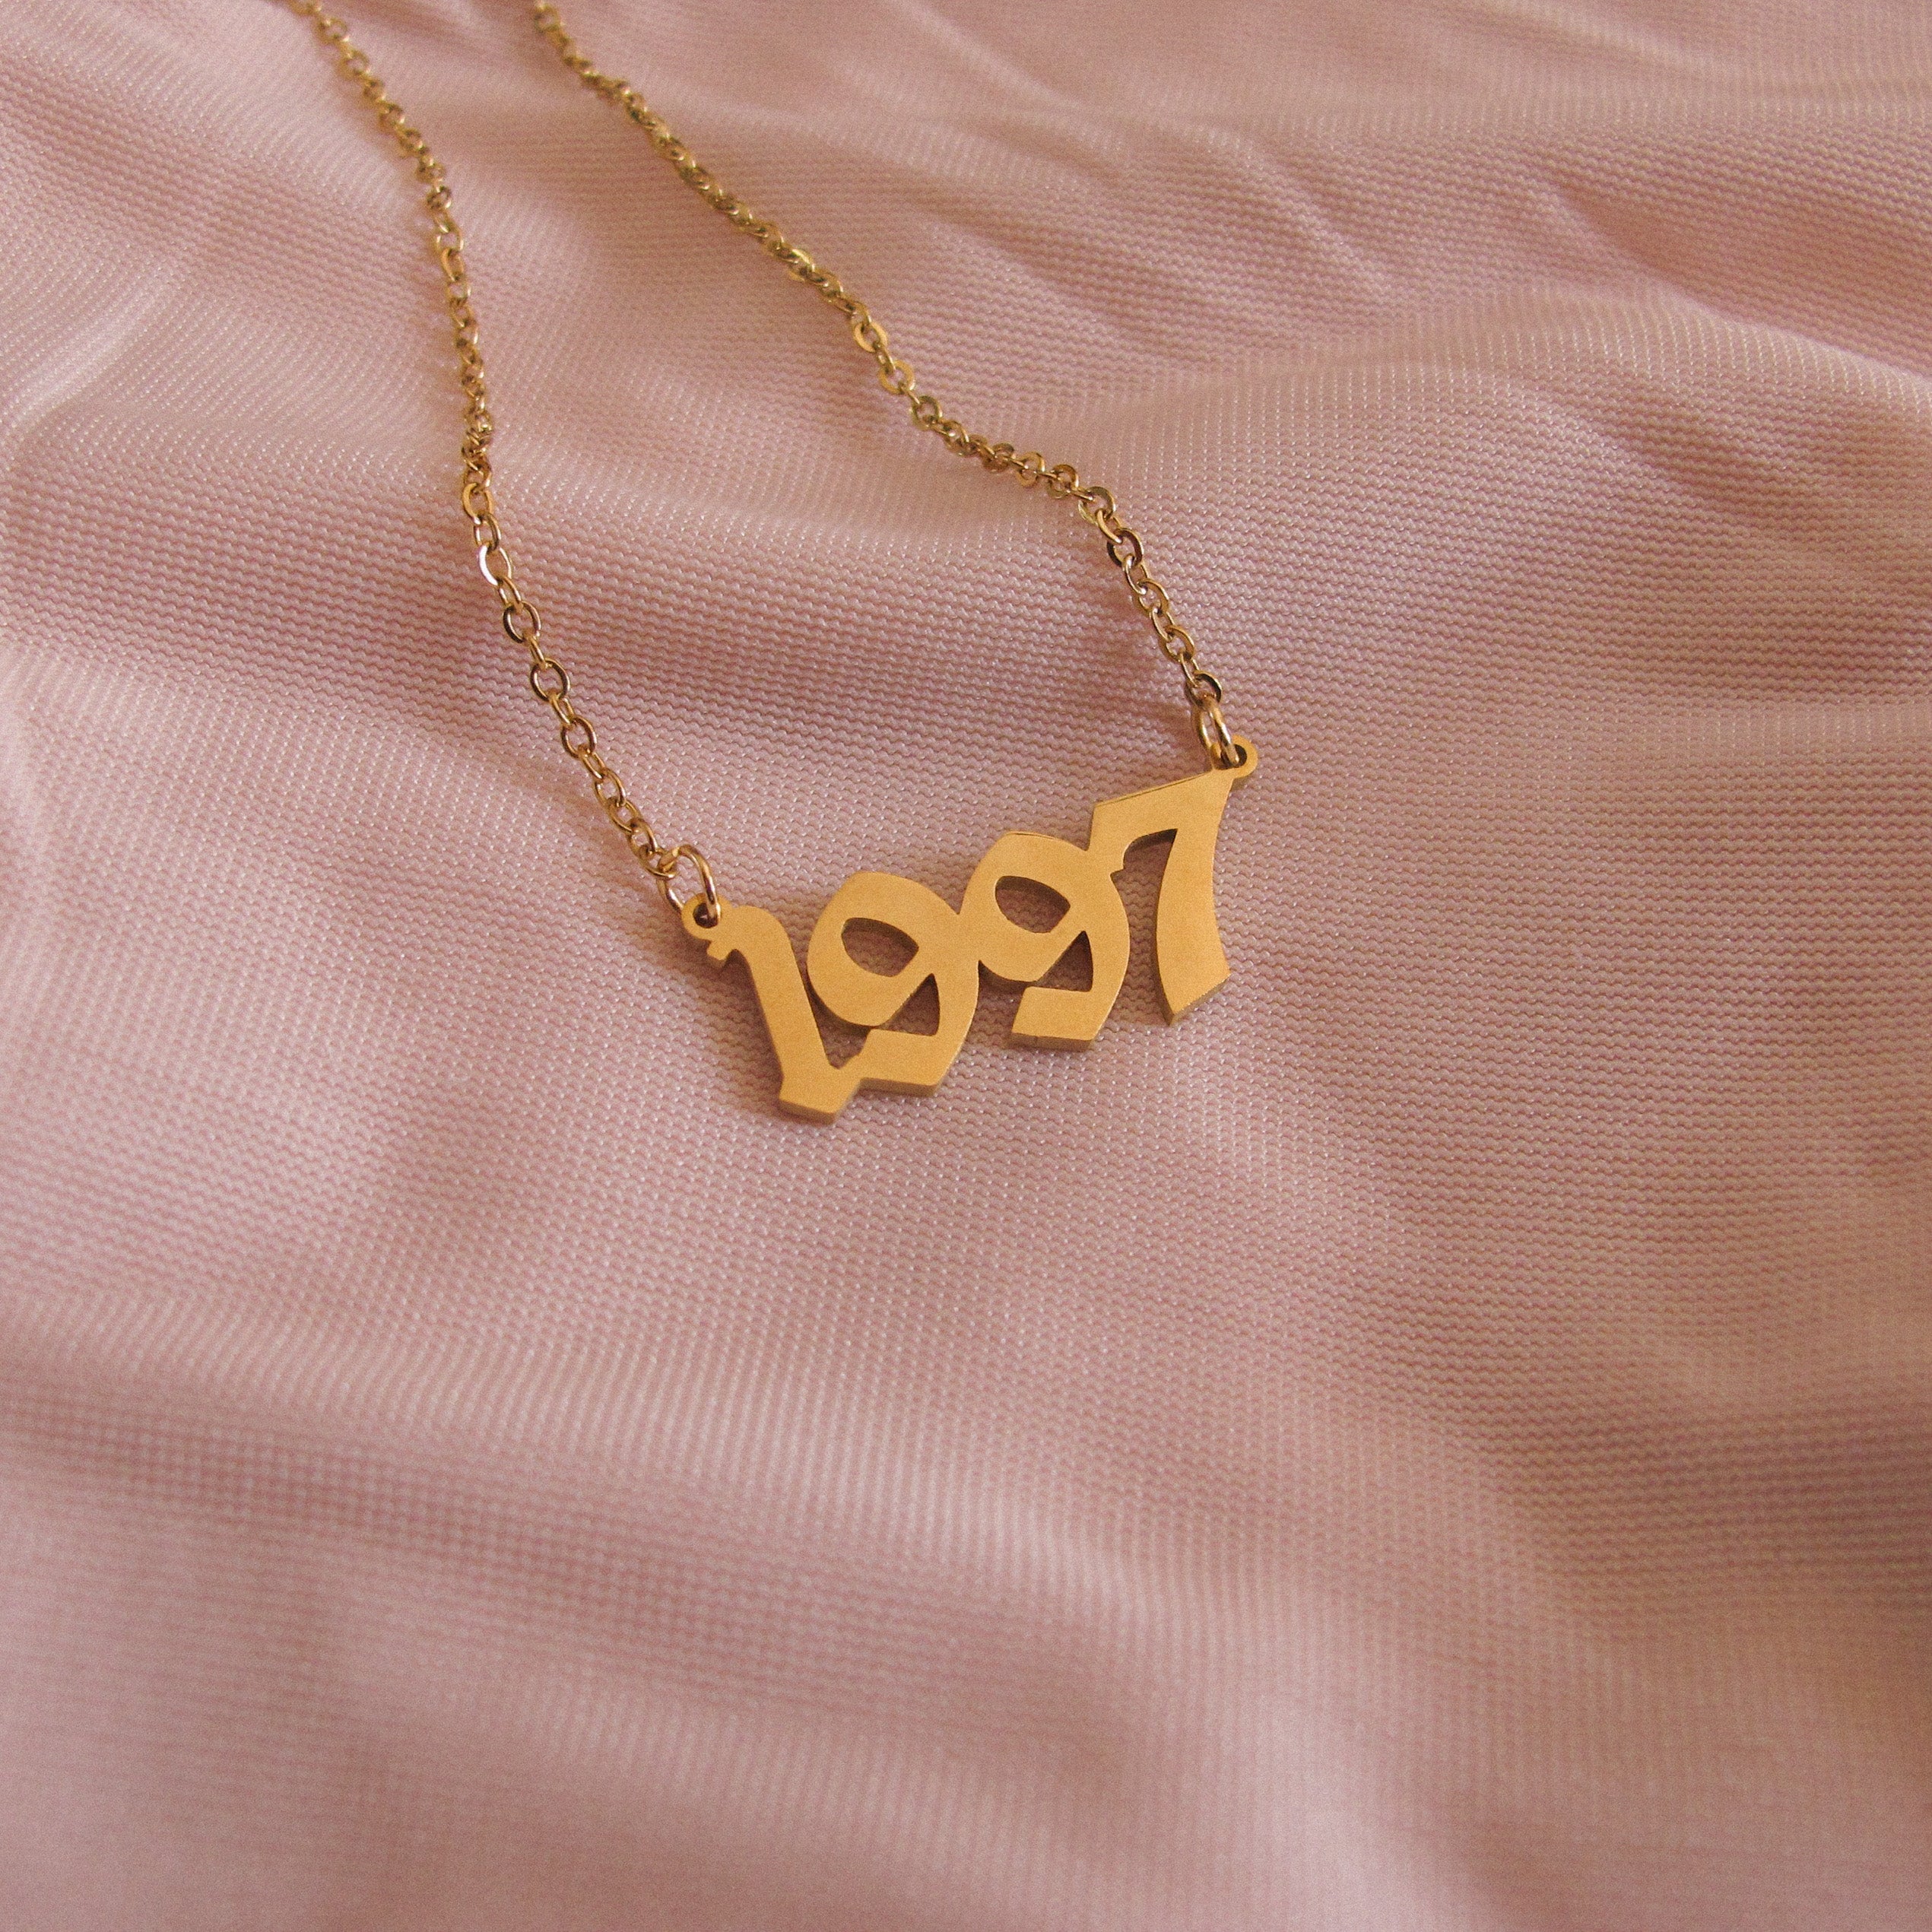 Clearance “90s Baby" Birth Date Necklace